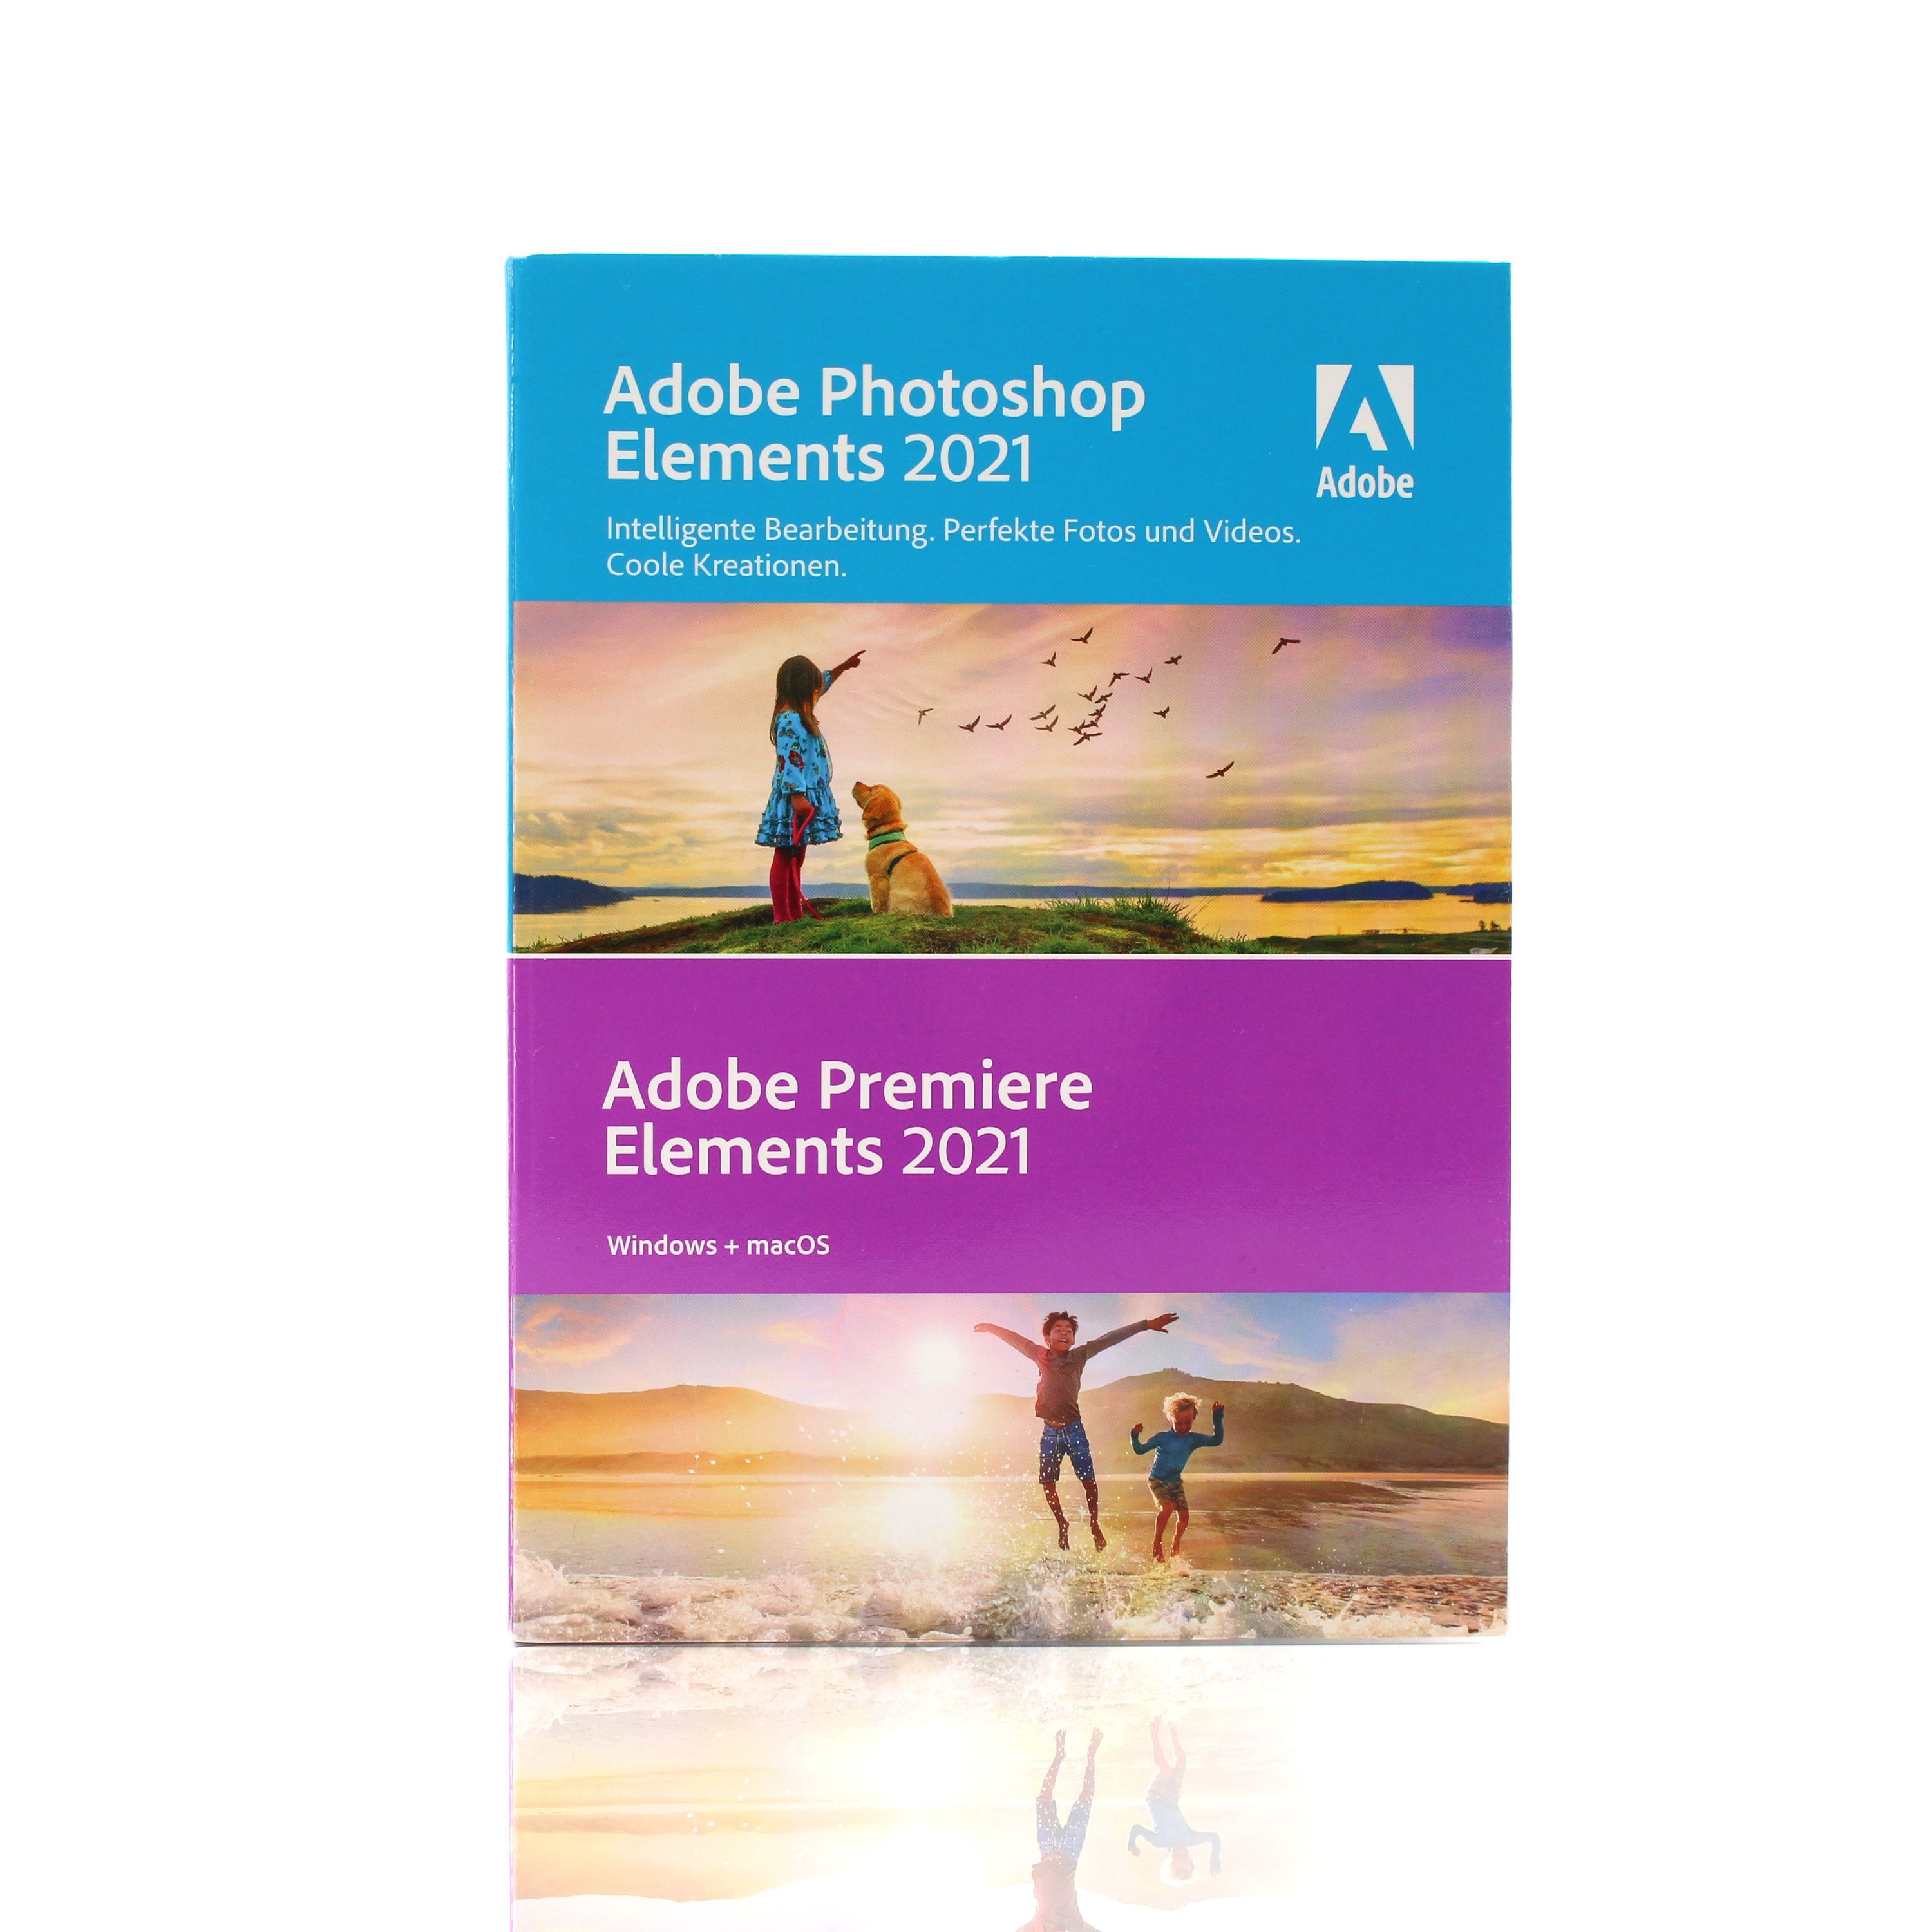 adobe photoshop elements 2021 system requirements